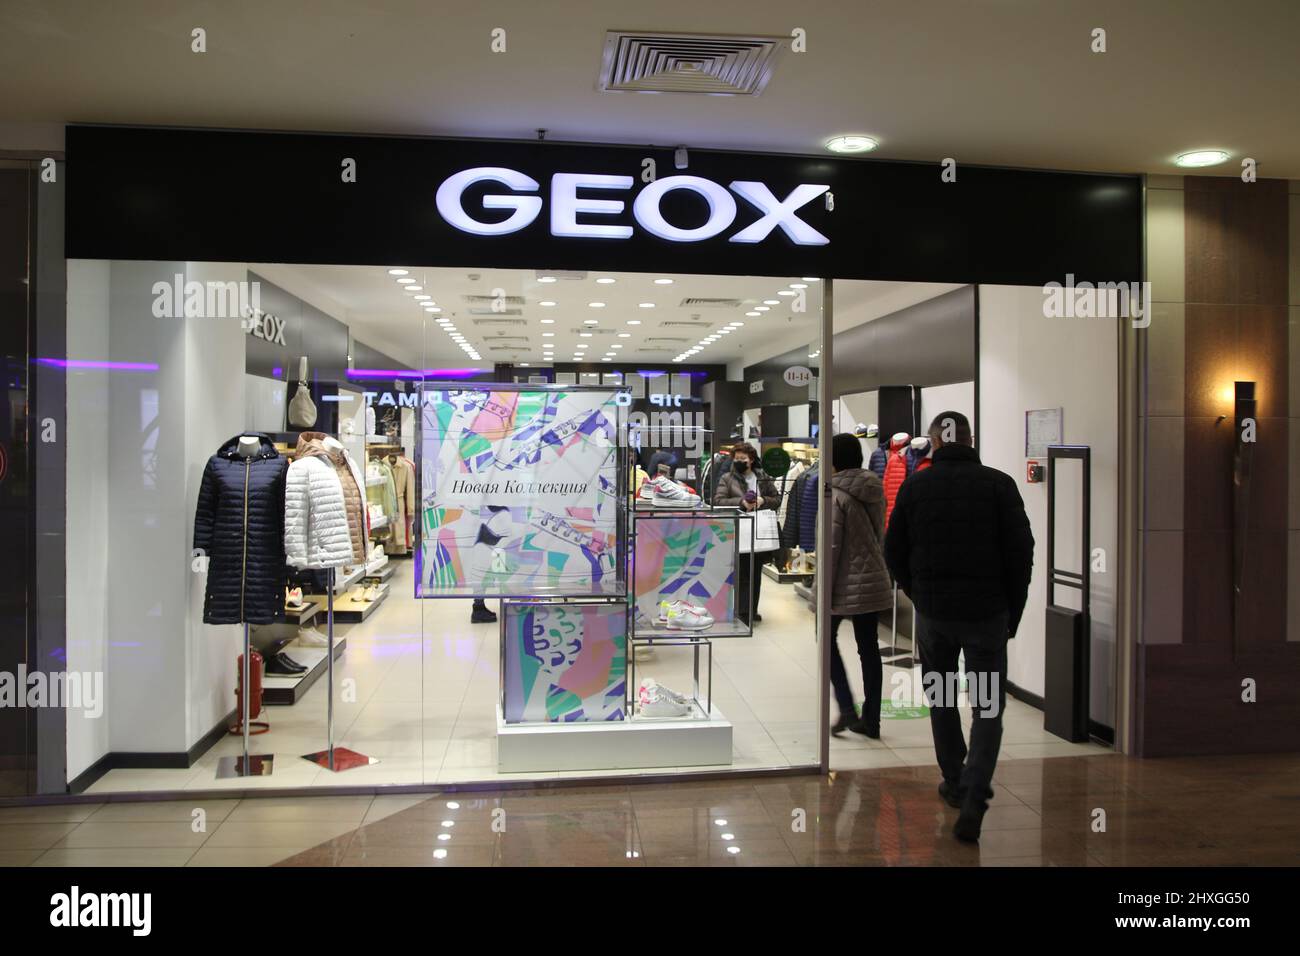 Geox High Resolution Stock Photography and Images - Alamy